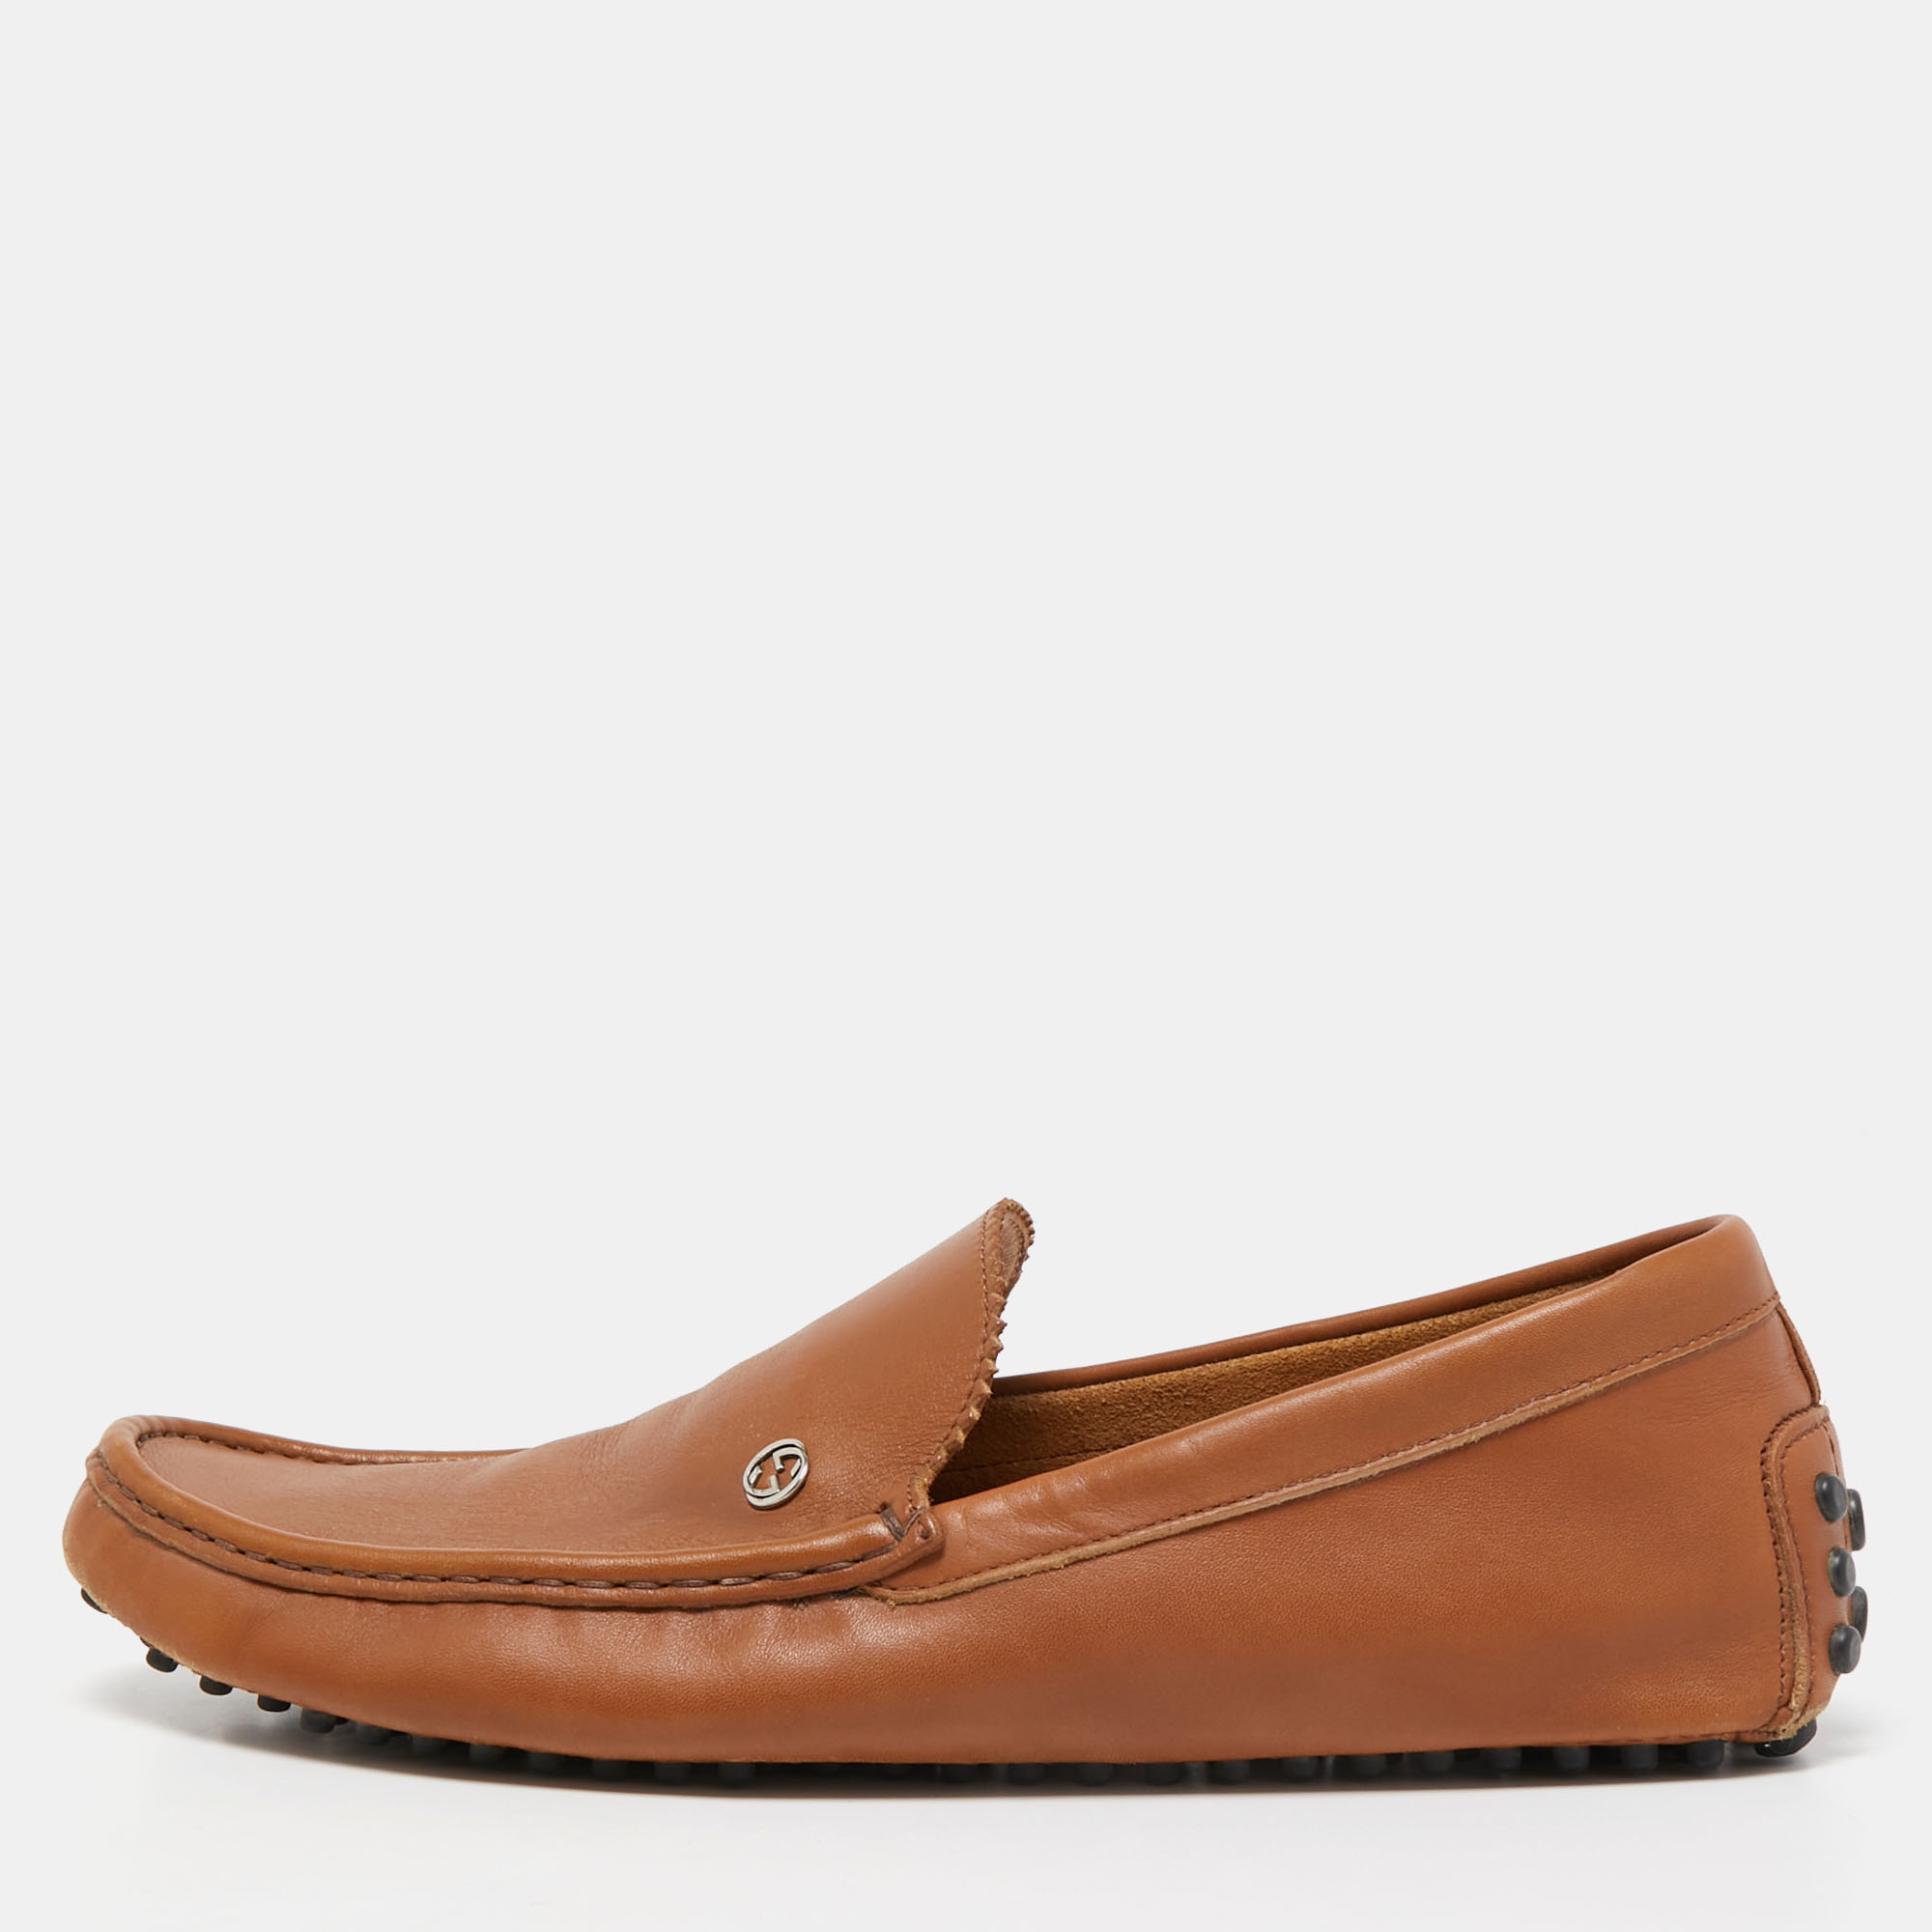 Gucci brown leather slip on loafers size 43.5